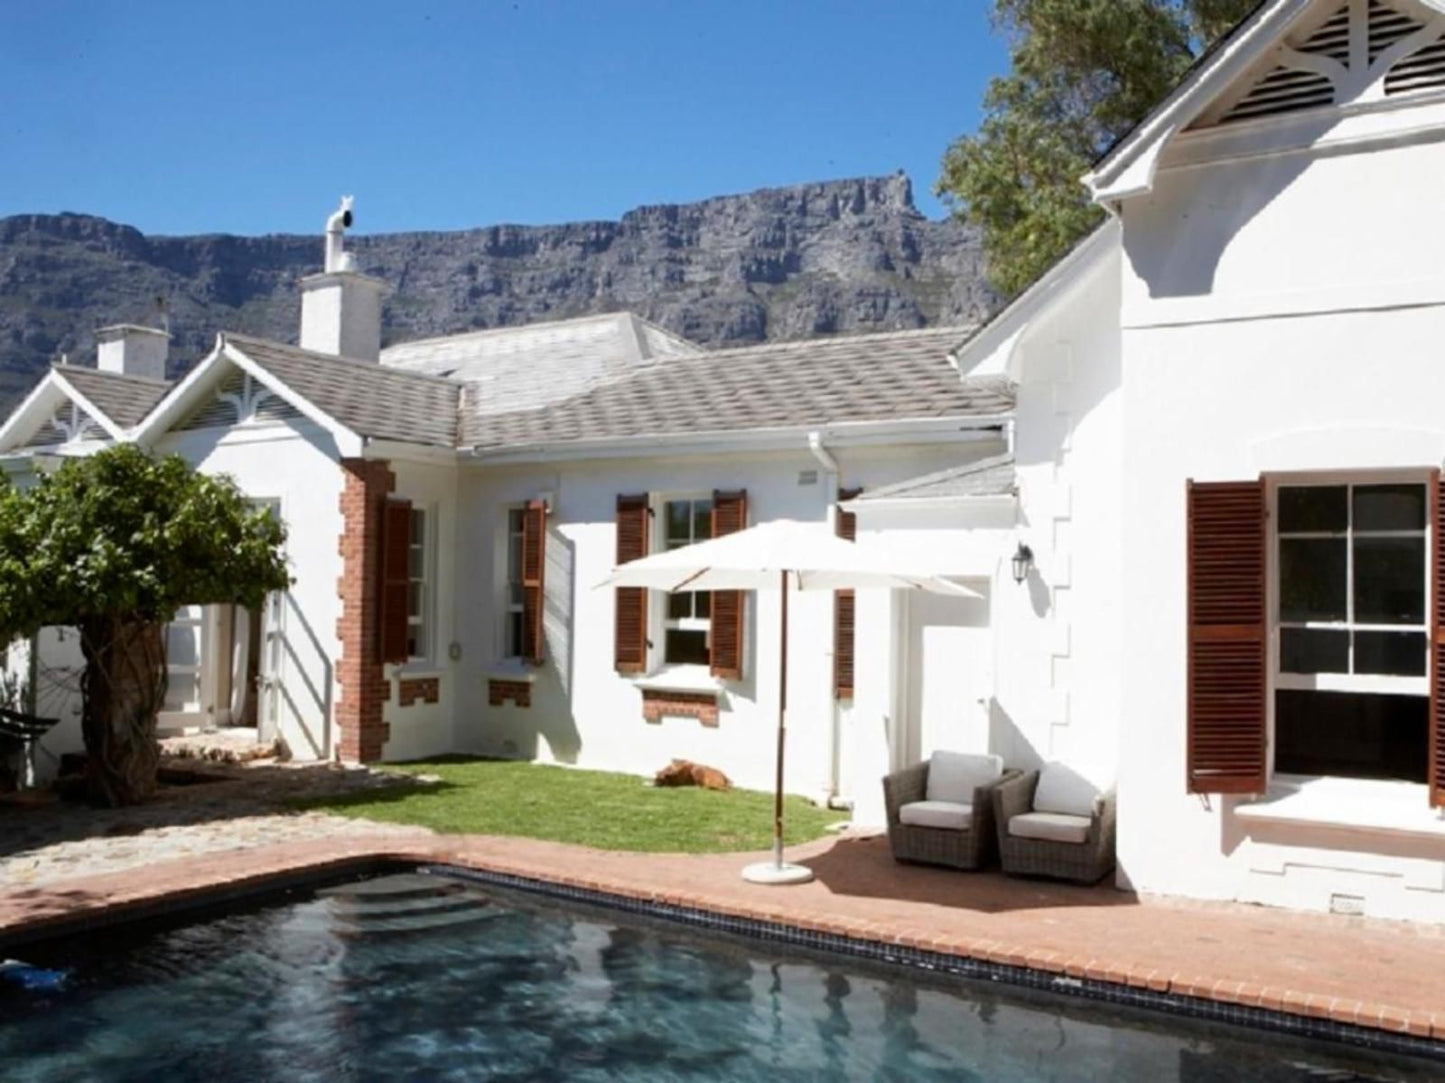 Inawestays Cottages Gardens Cape Town Western Cape South Africa House, Building, Architecture, Swimming Pool